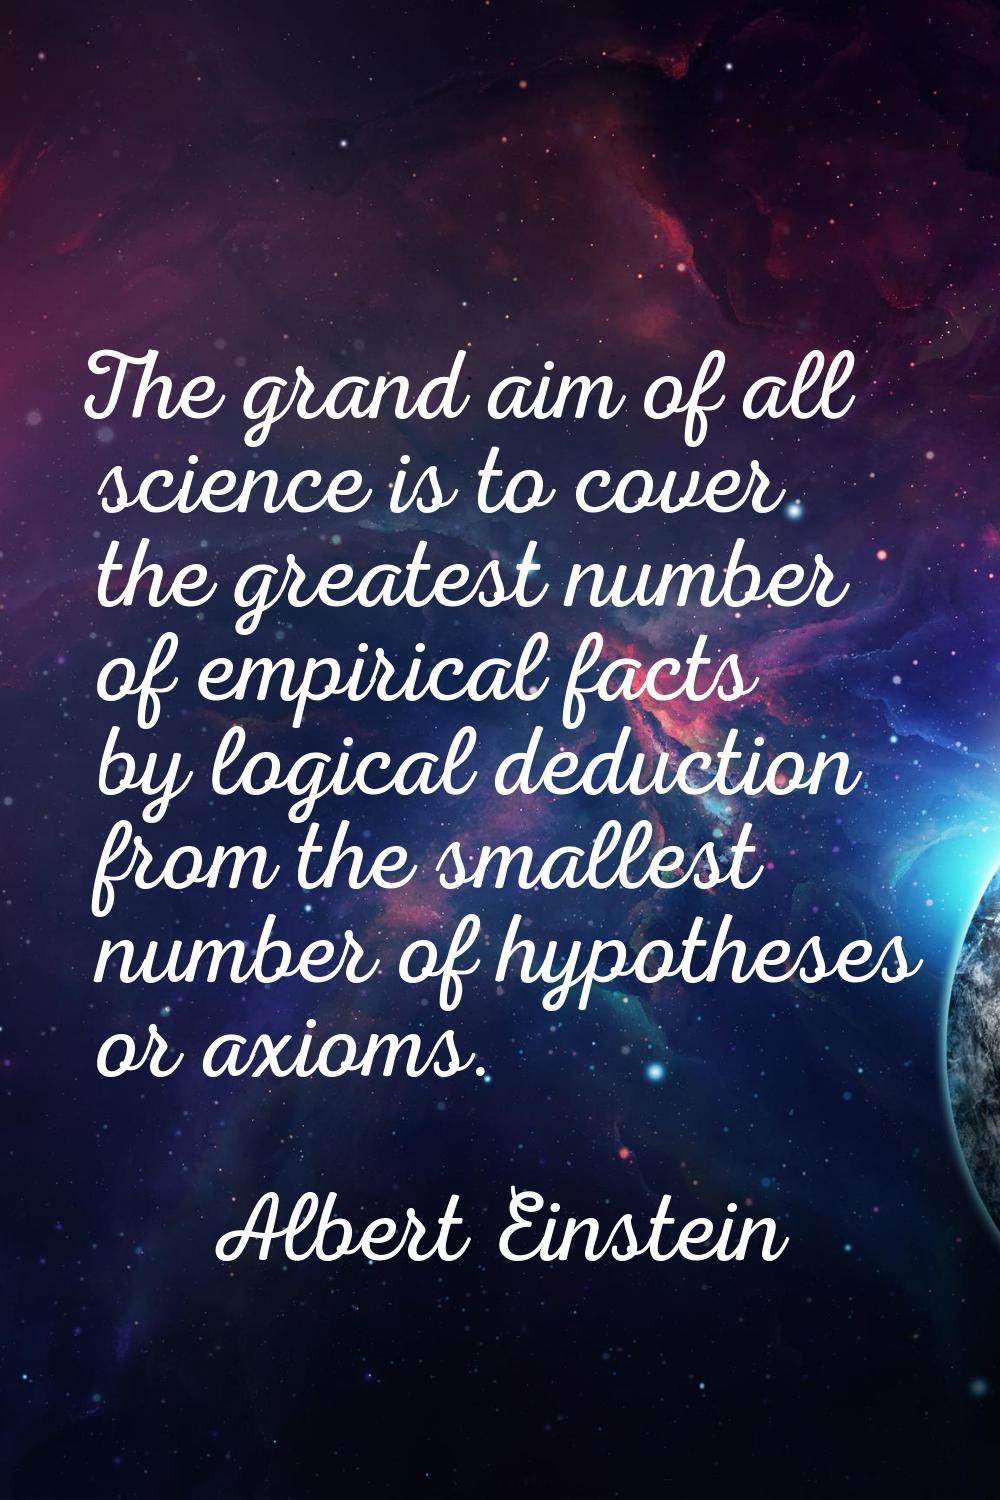 The grand aim of all science is to cover the greatest number of empirical facts by logical deductio